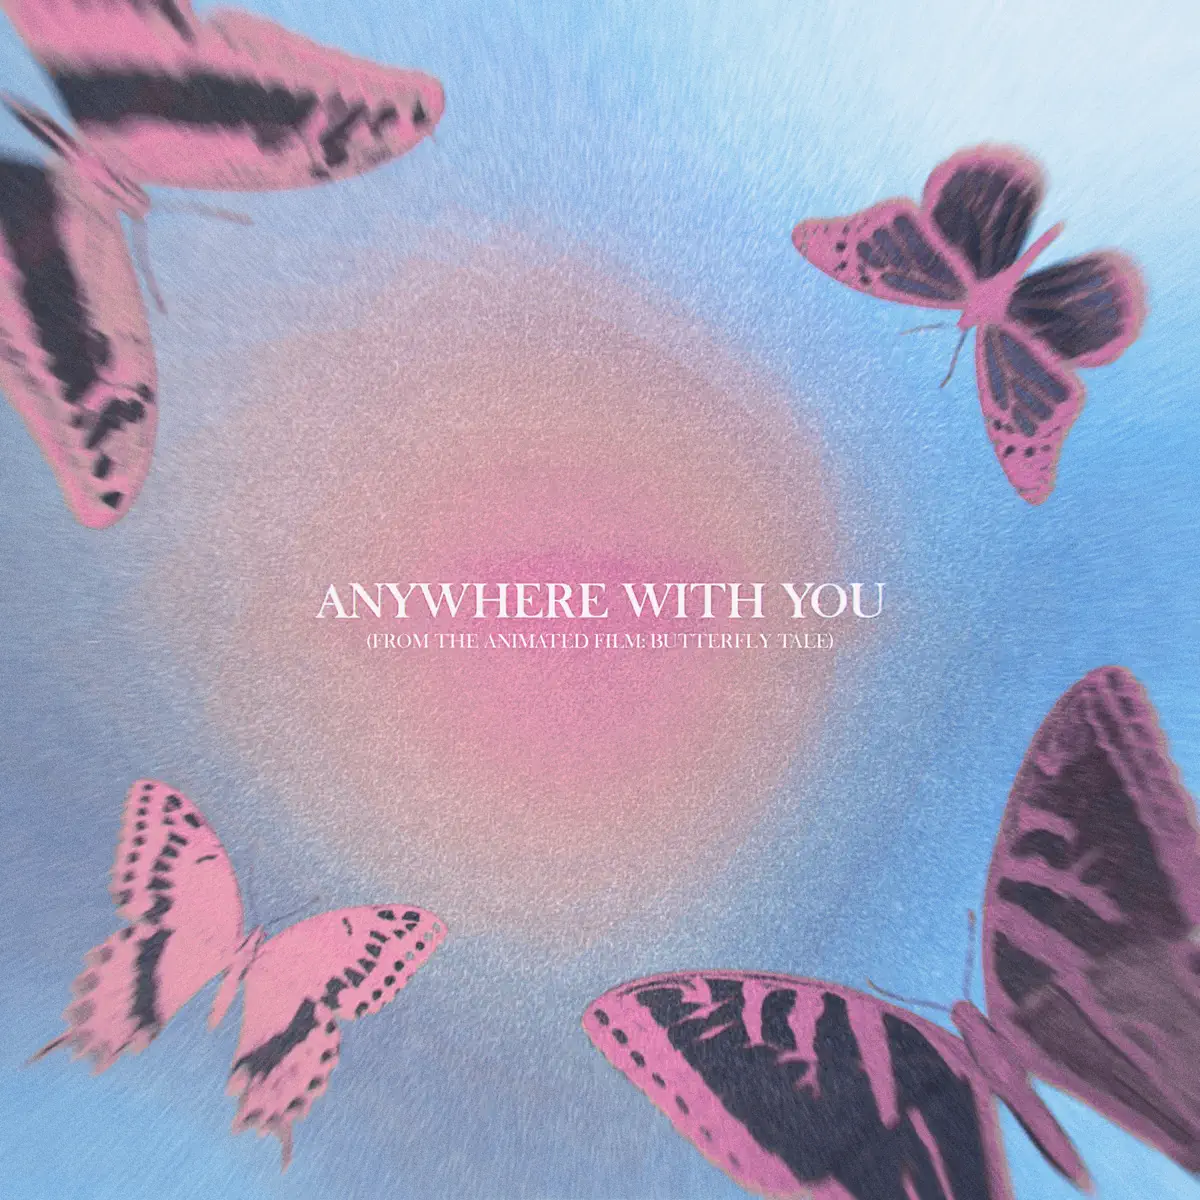 Johnny Orlando - Anywhere With You (From The Animated Film Butterfly Tale) - Single (2023) [iTunes Plus AAC M4A]-新房子